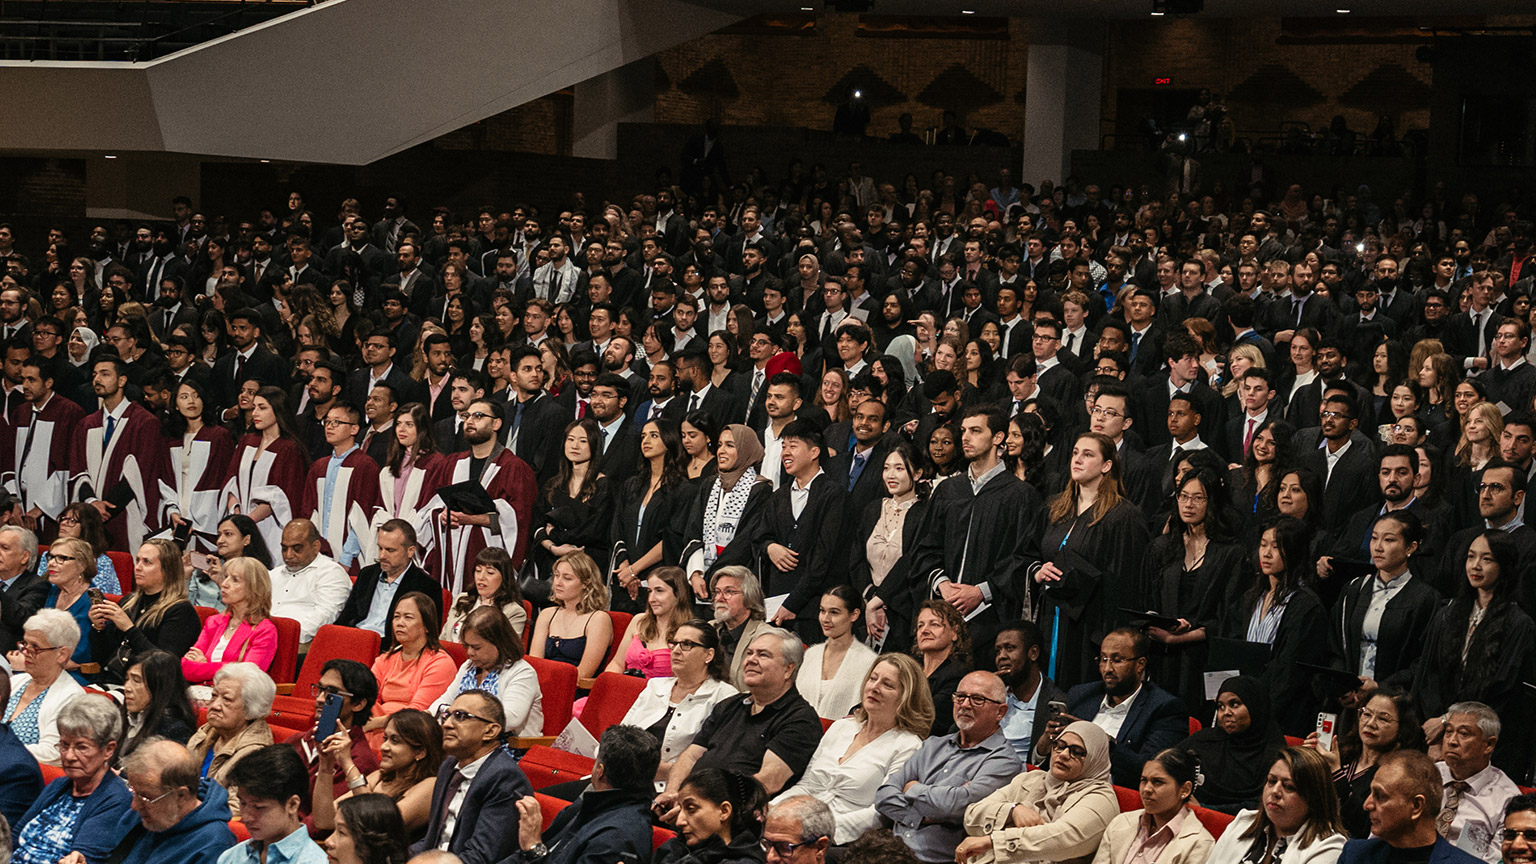 Rows of graduates stand in the seats of First Ontario Concert Hall